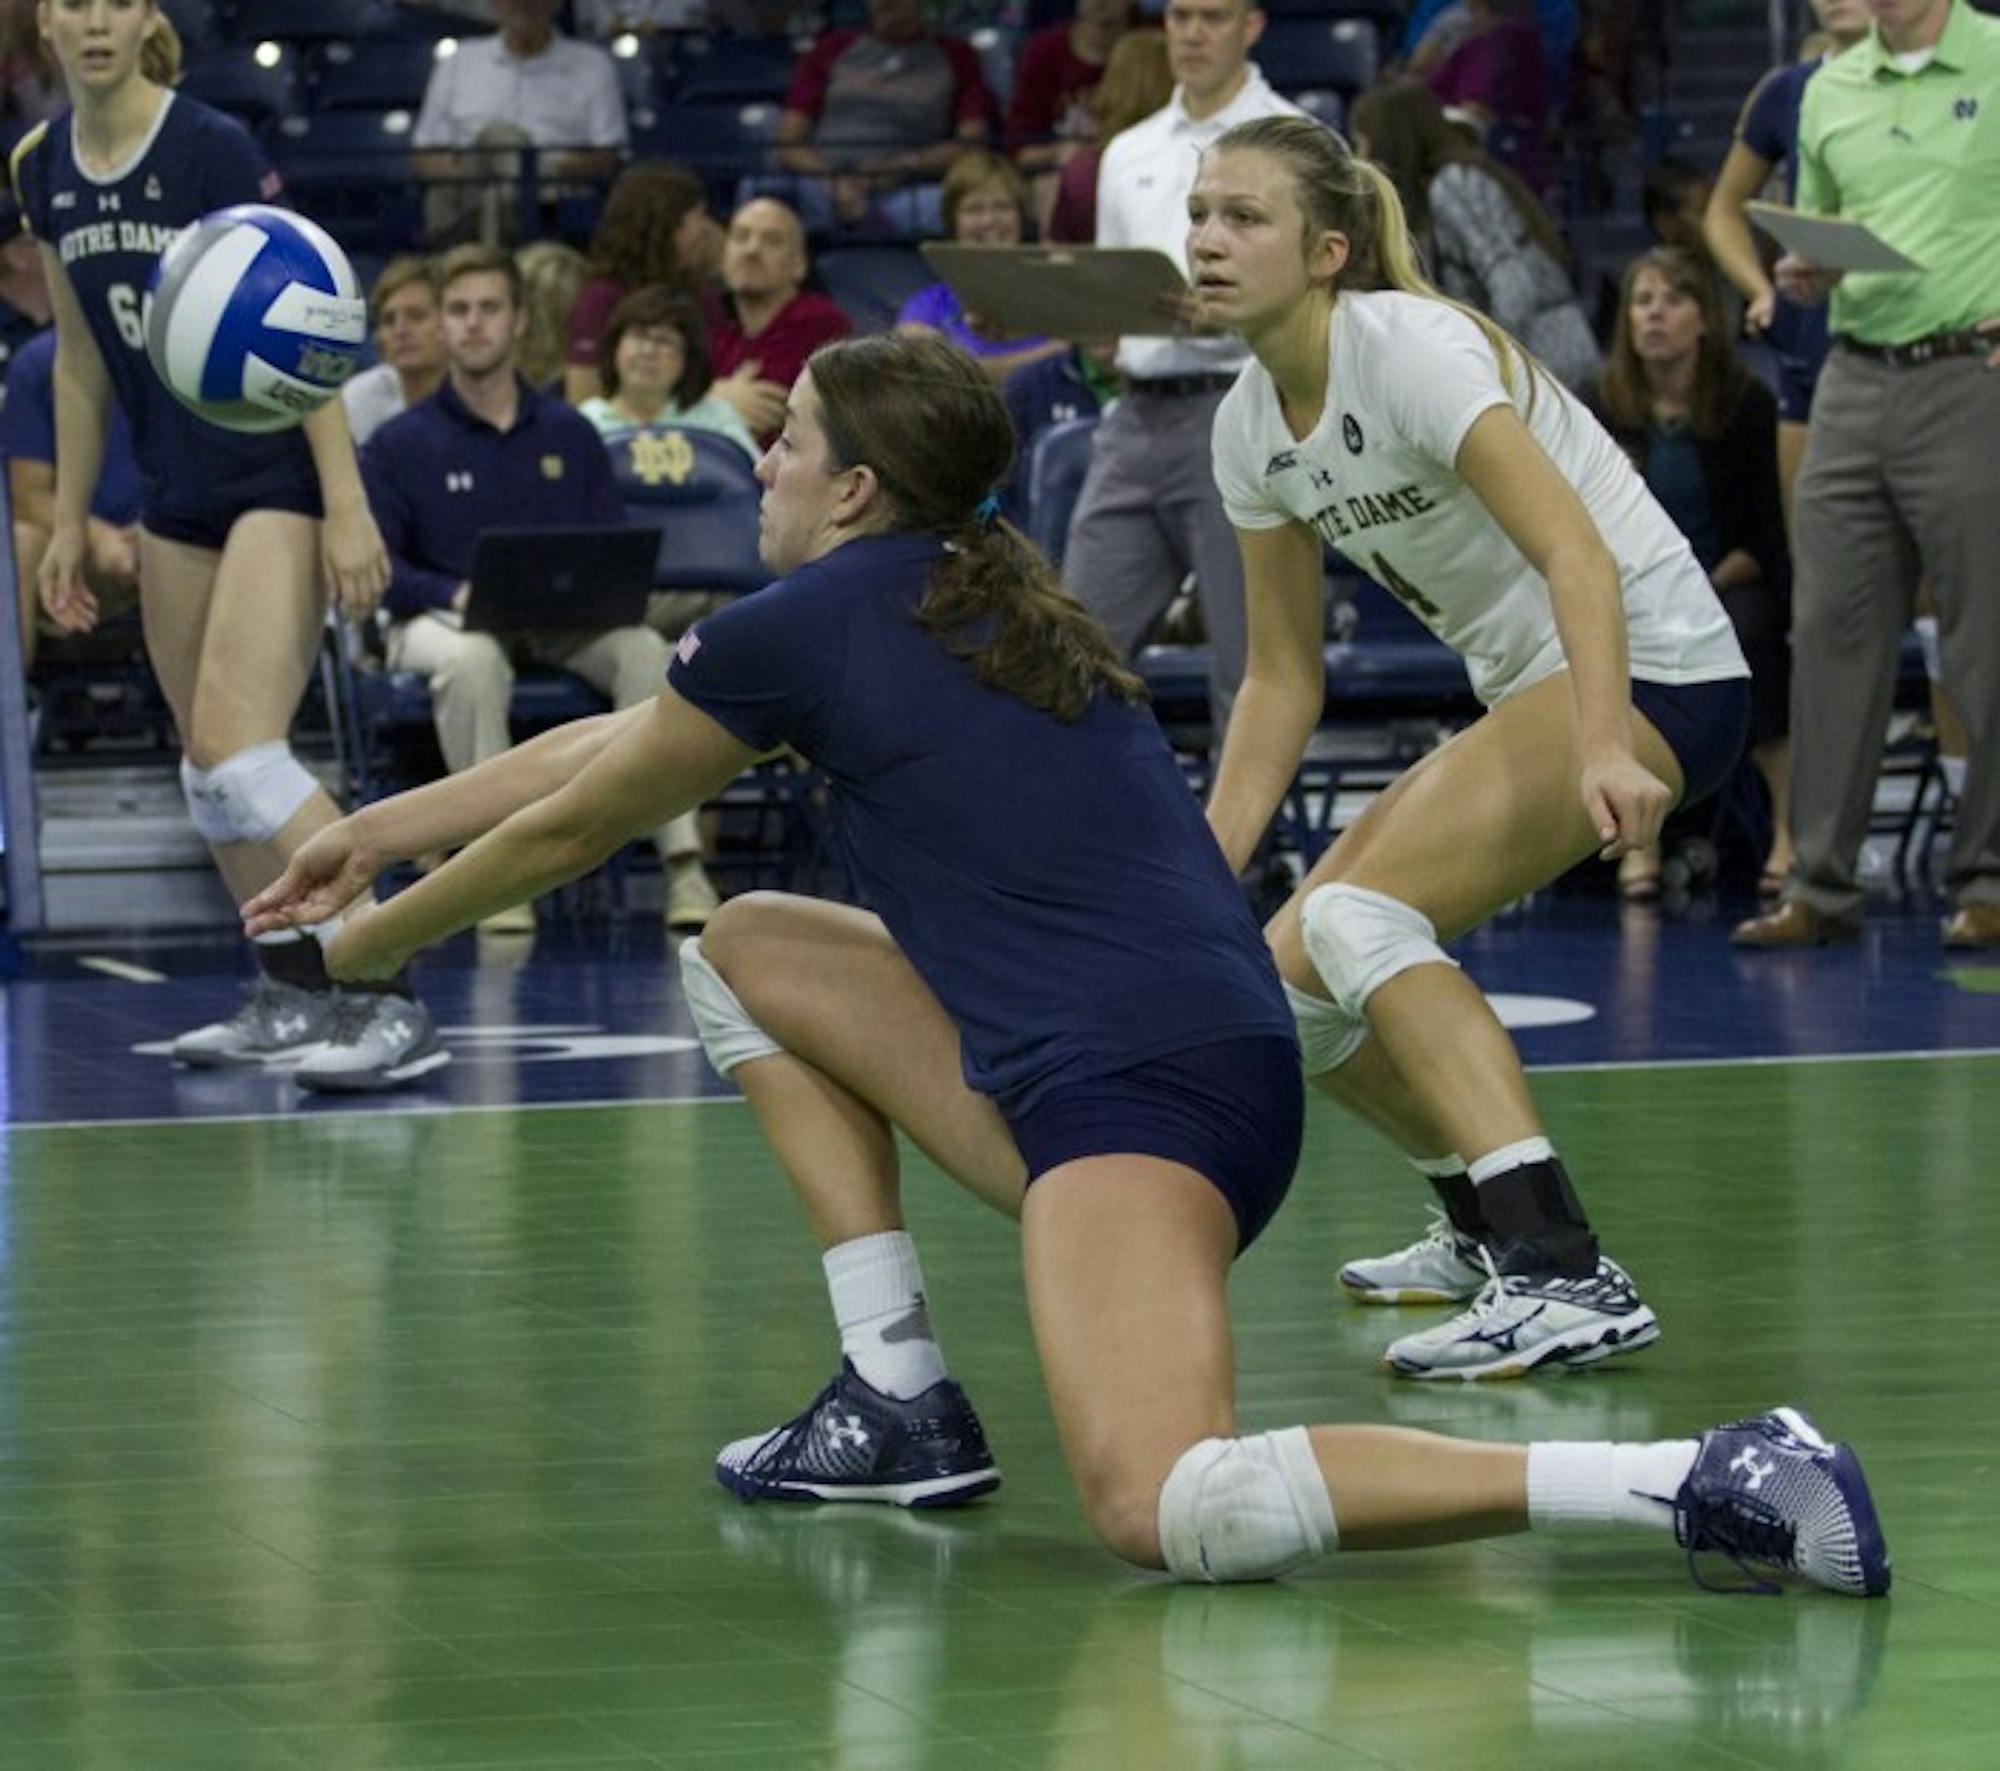 Sophomore outside hitter Sydney Kuhn digs a ball during Notre Dame’s 3-0 loss against Florida State on Sunday afternoon.